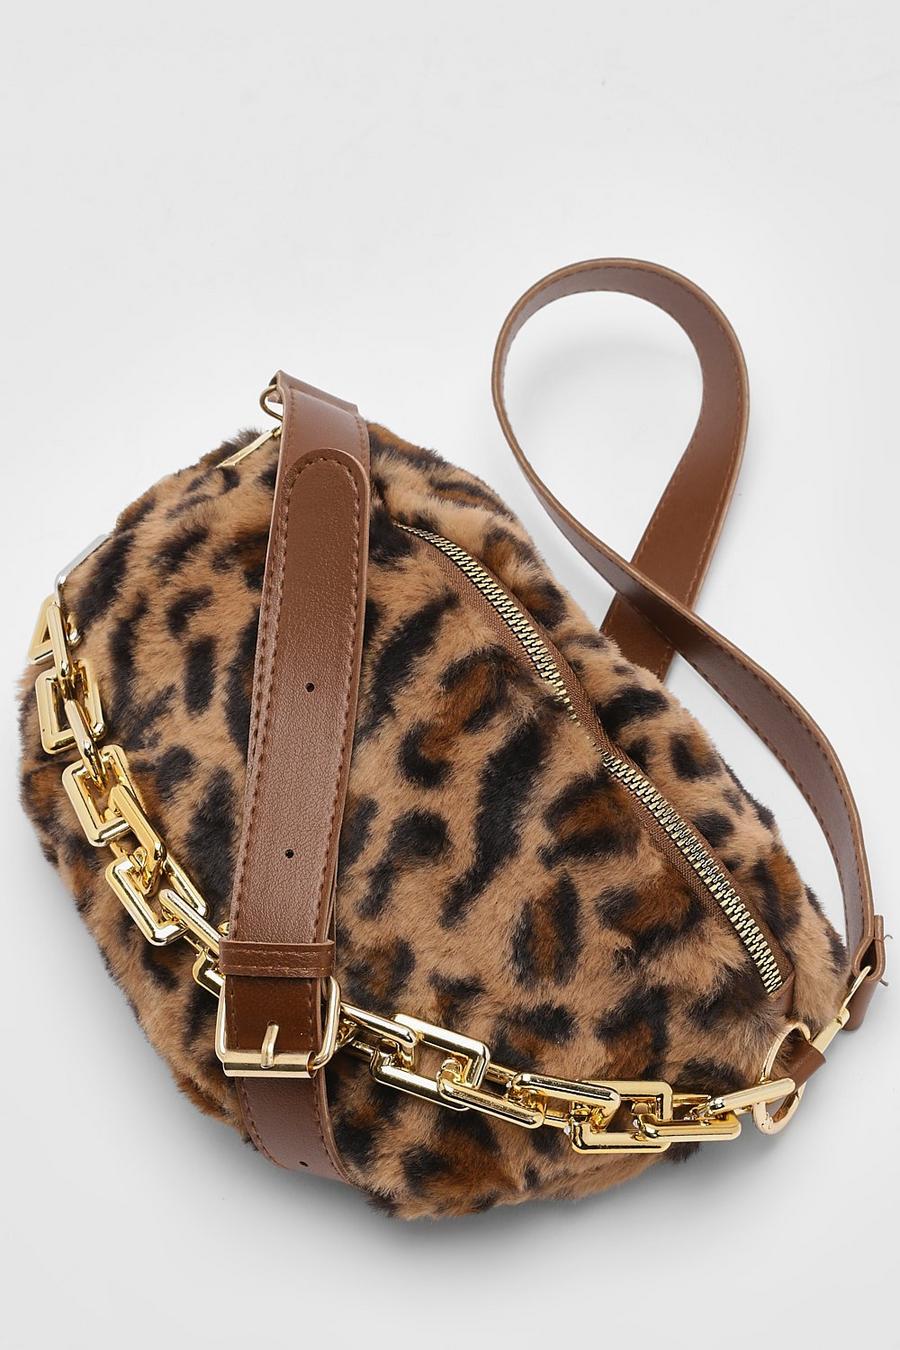 Plus Leopard Print Fanny Pack With Chain